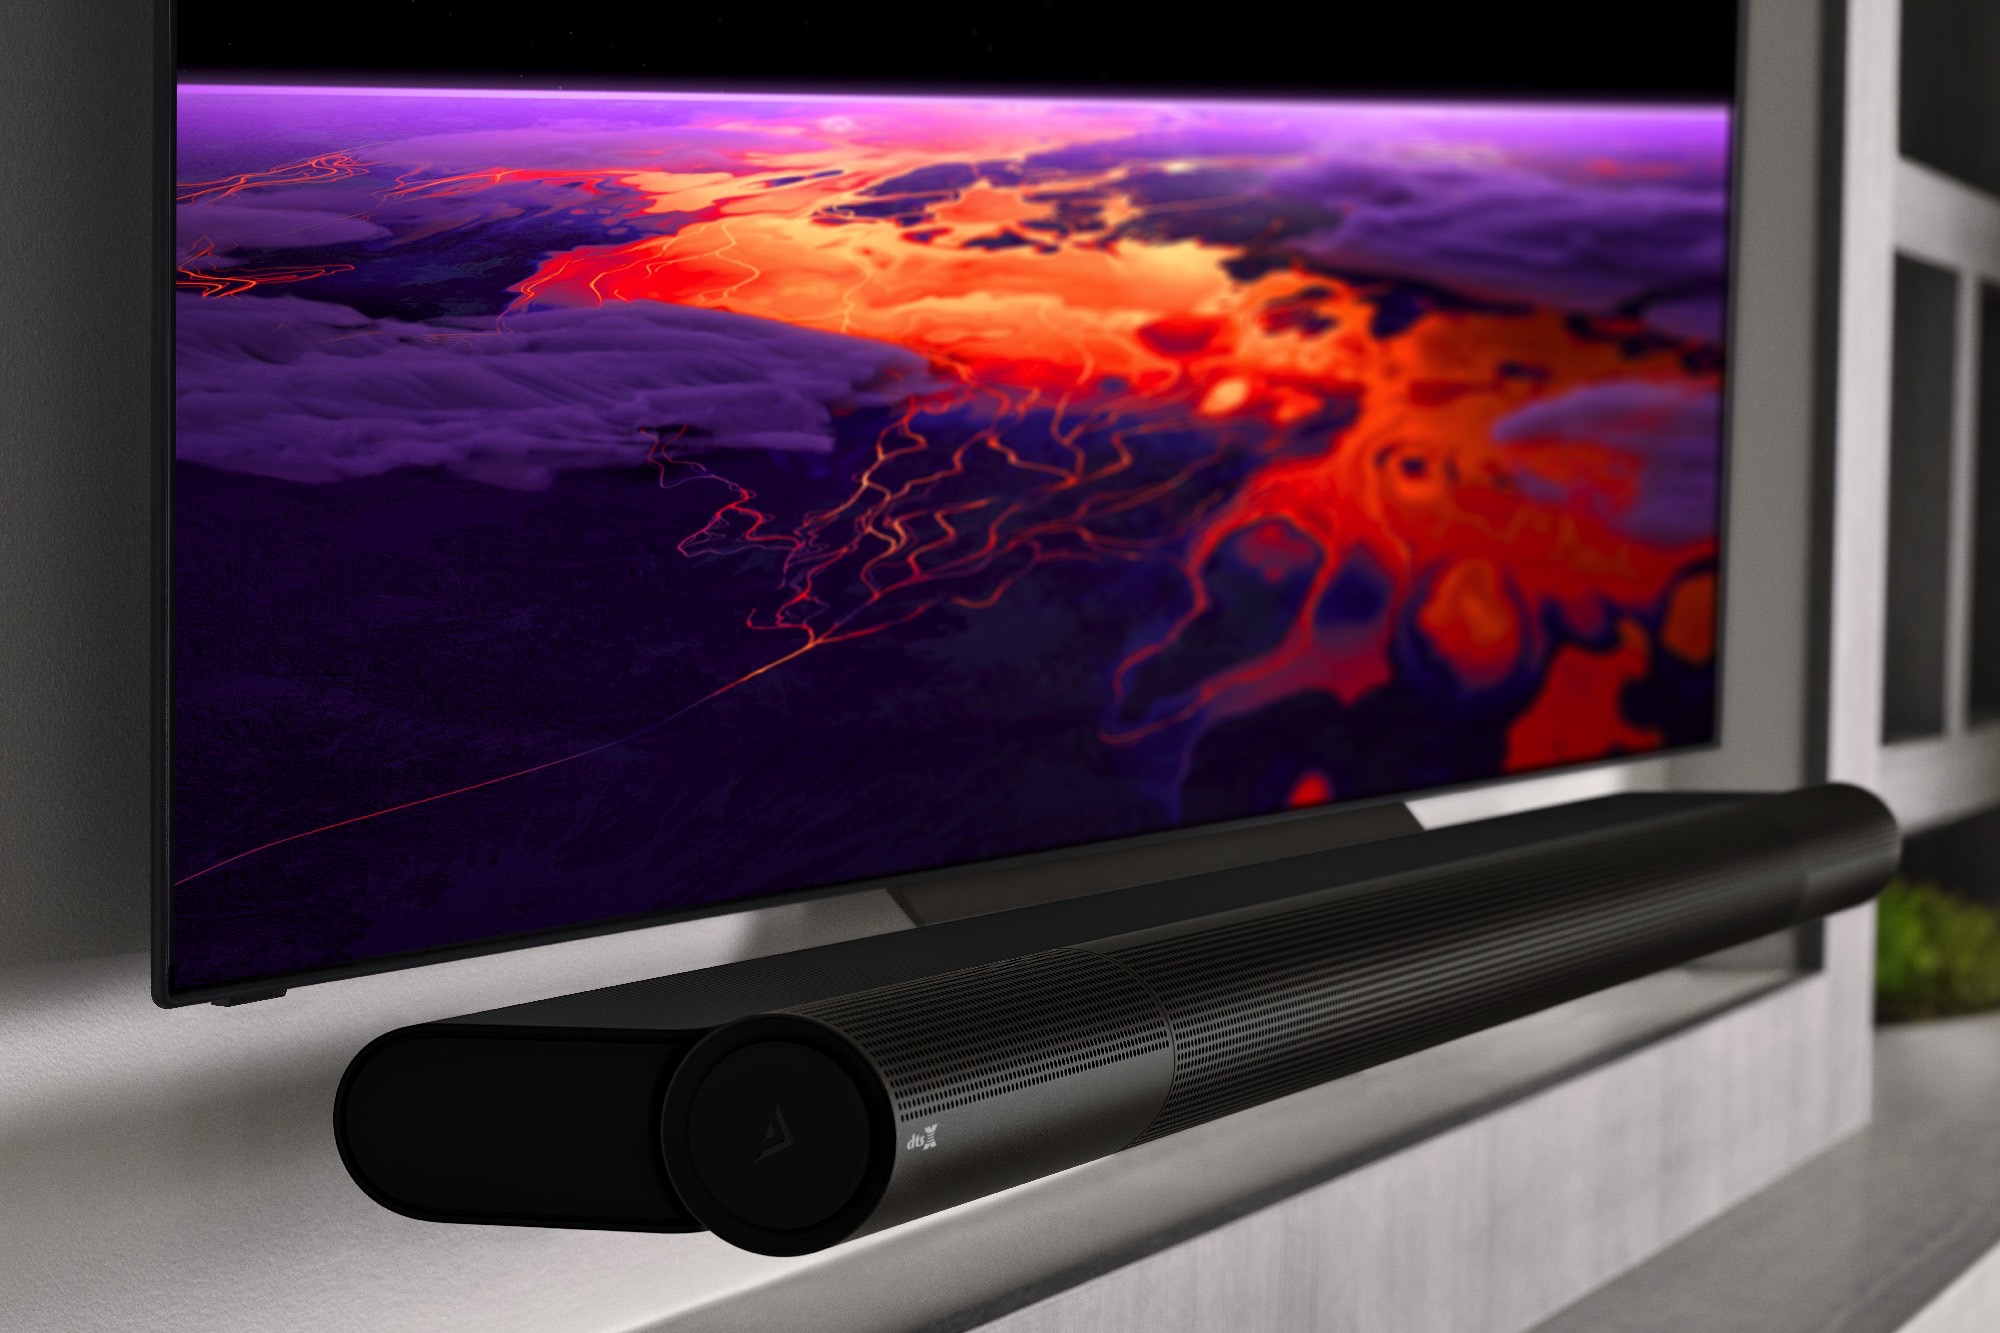 9. Consider upgrading to a soundbar with HDMI ARC in the future